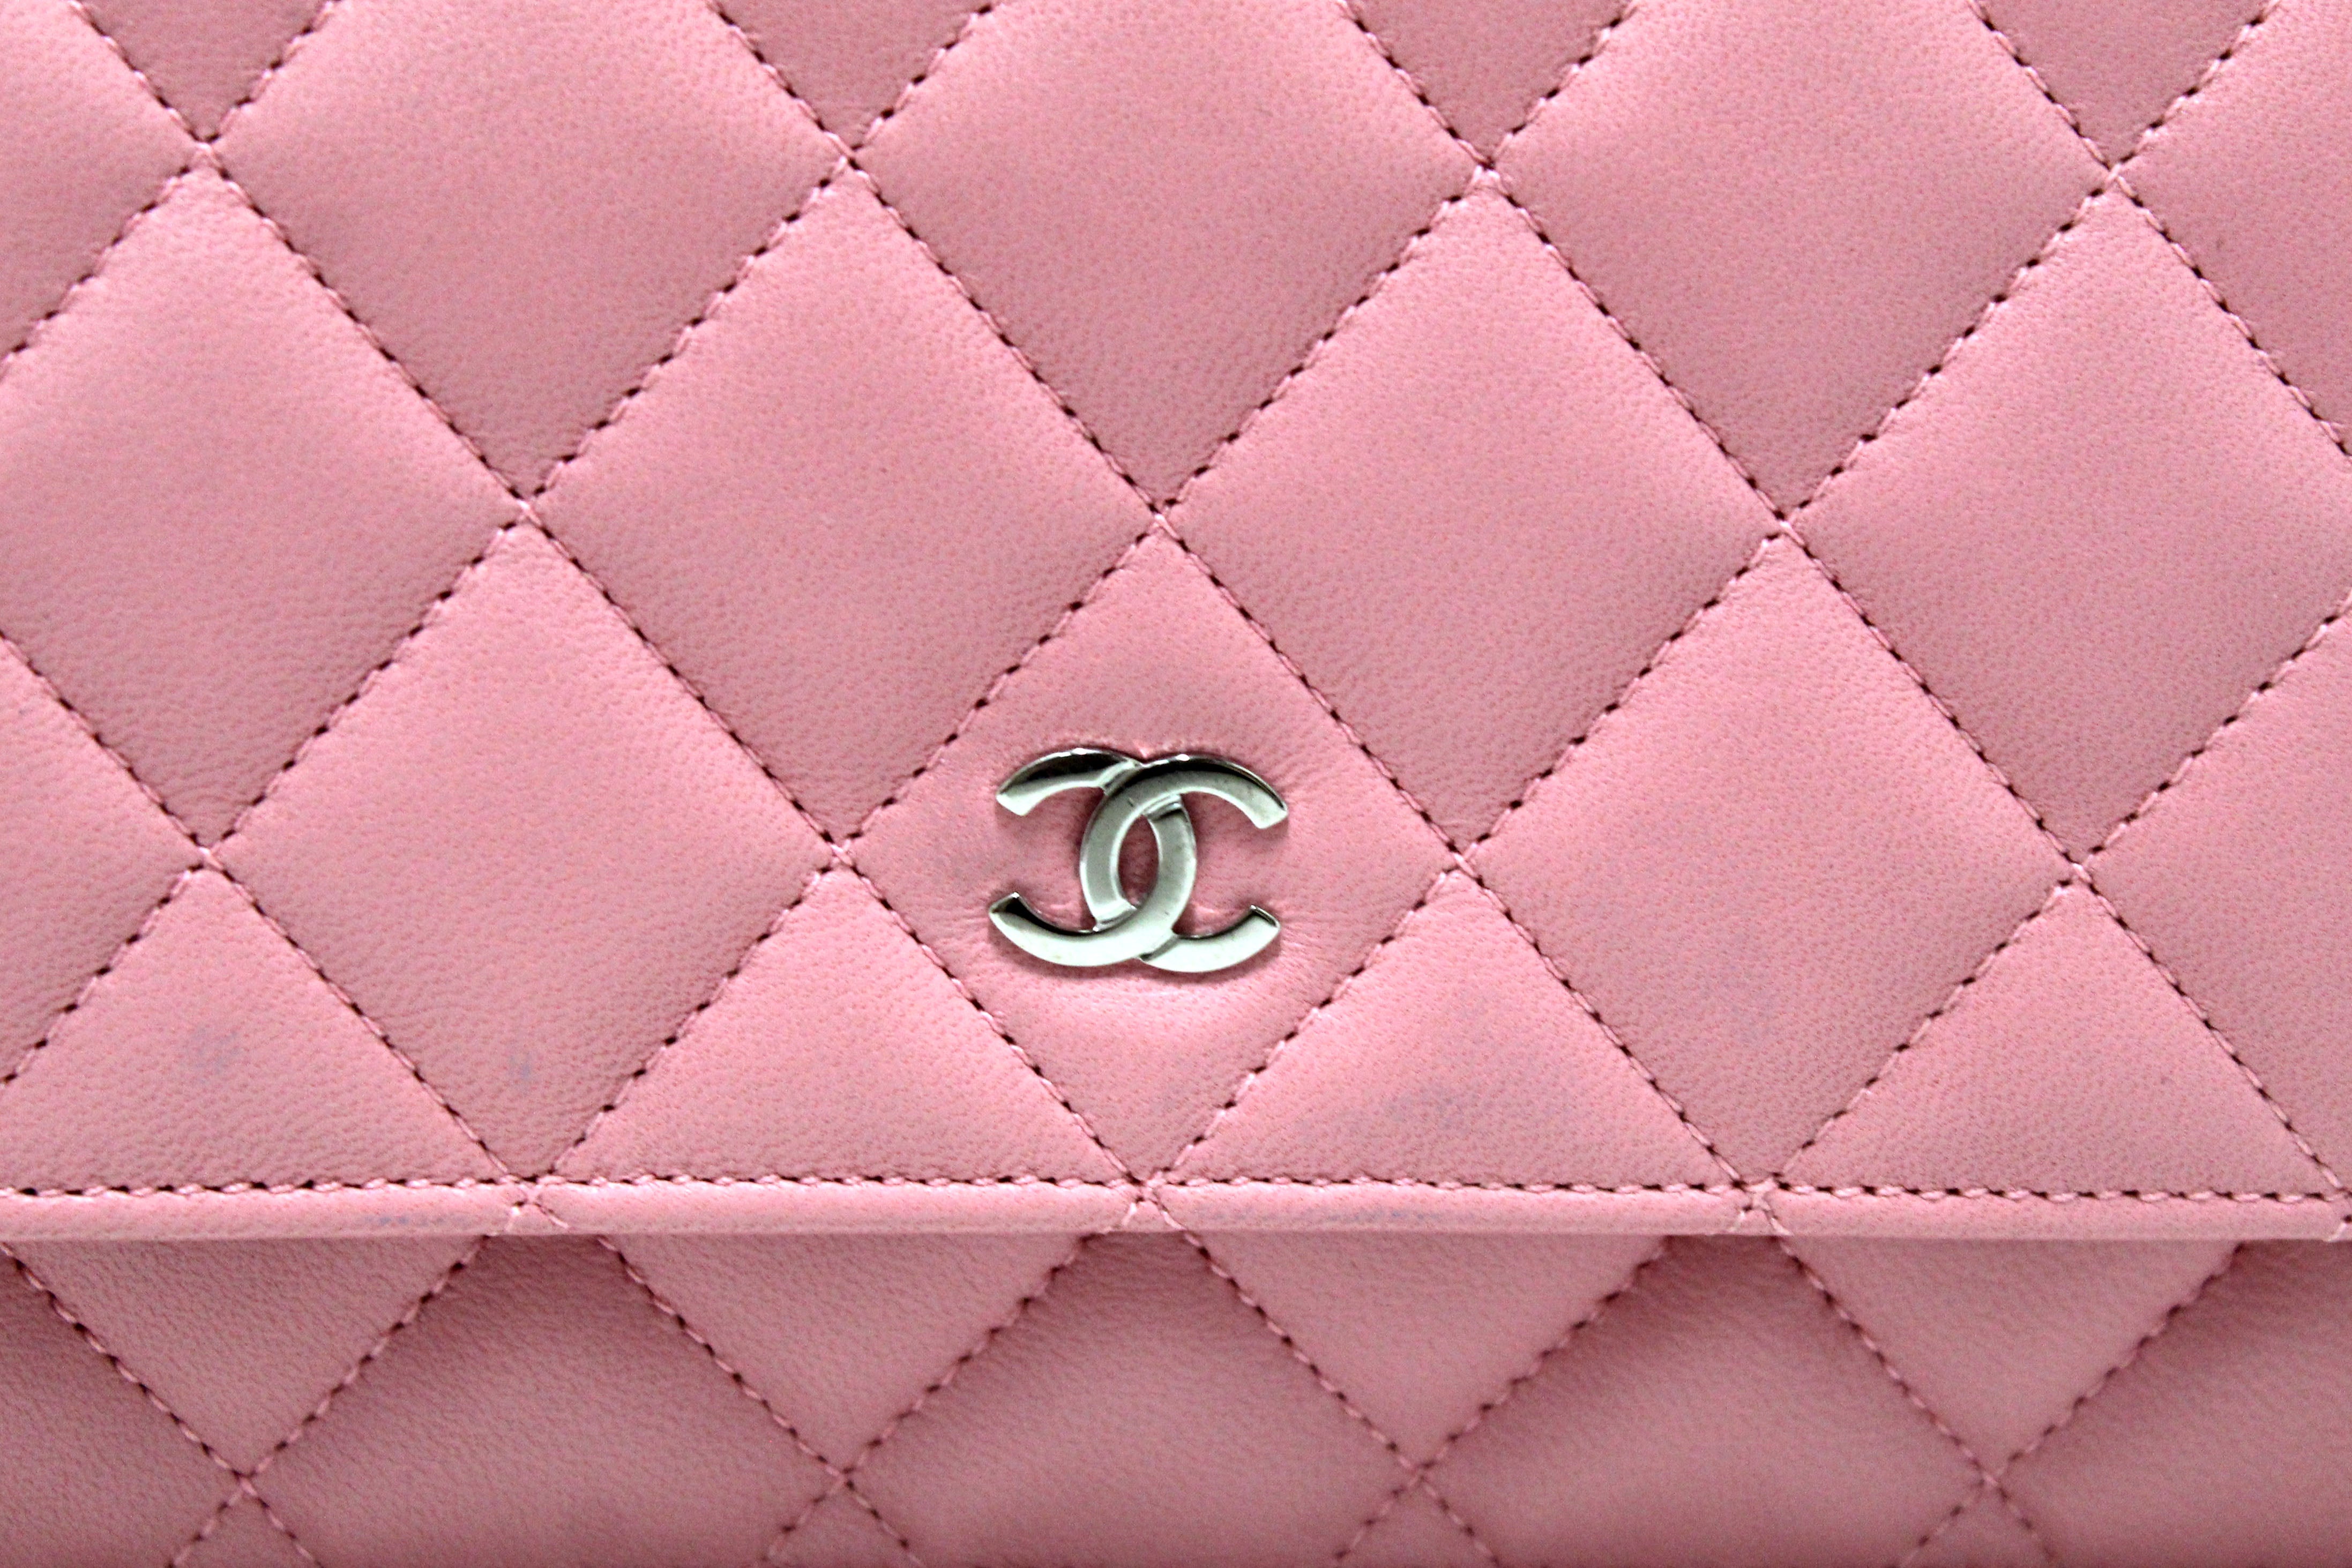 Chanel Wallet on Chain WoC in Pink Iridescent Caviar with Pearly CC Plaque  - SOLD